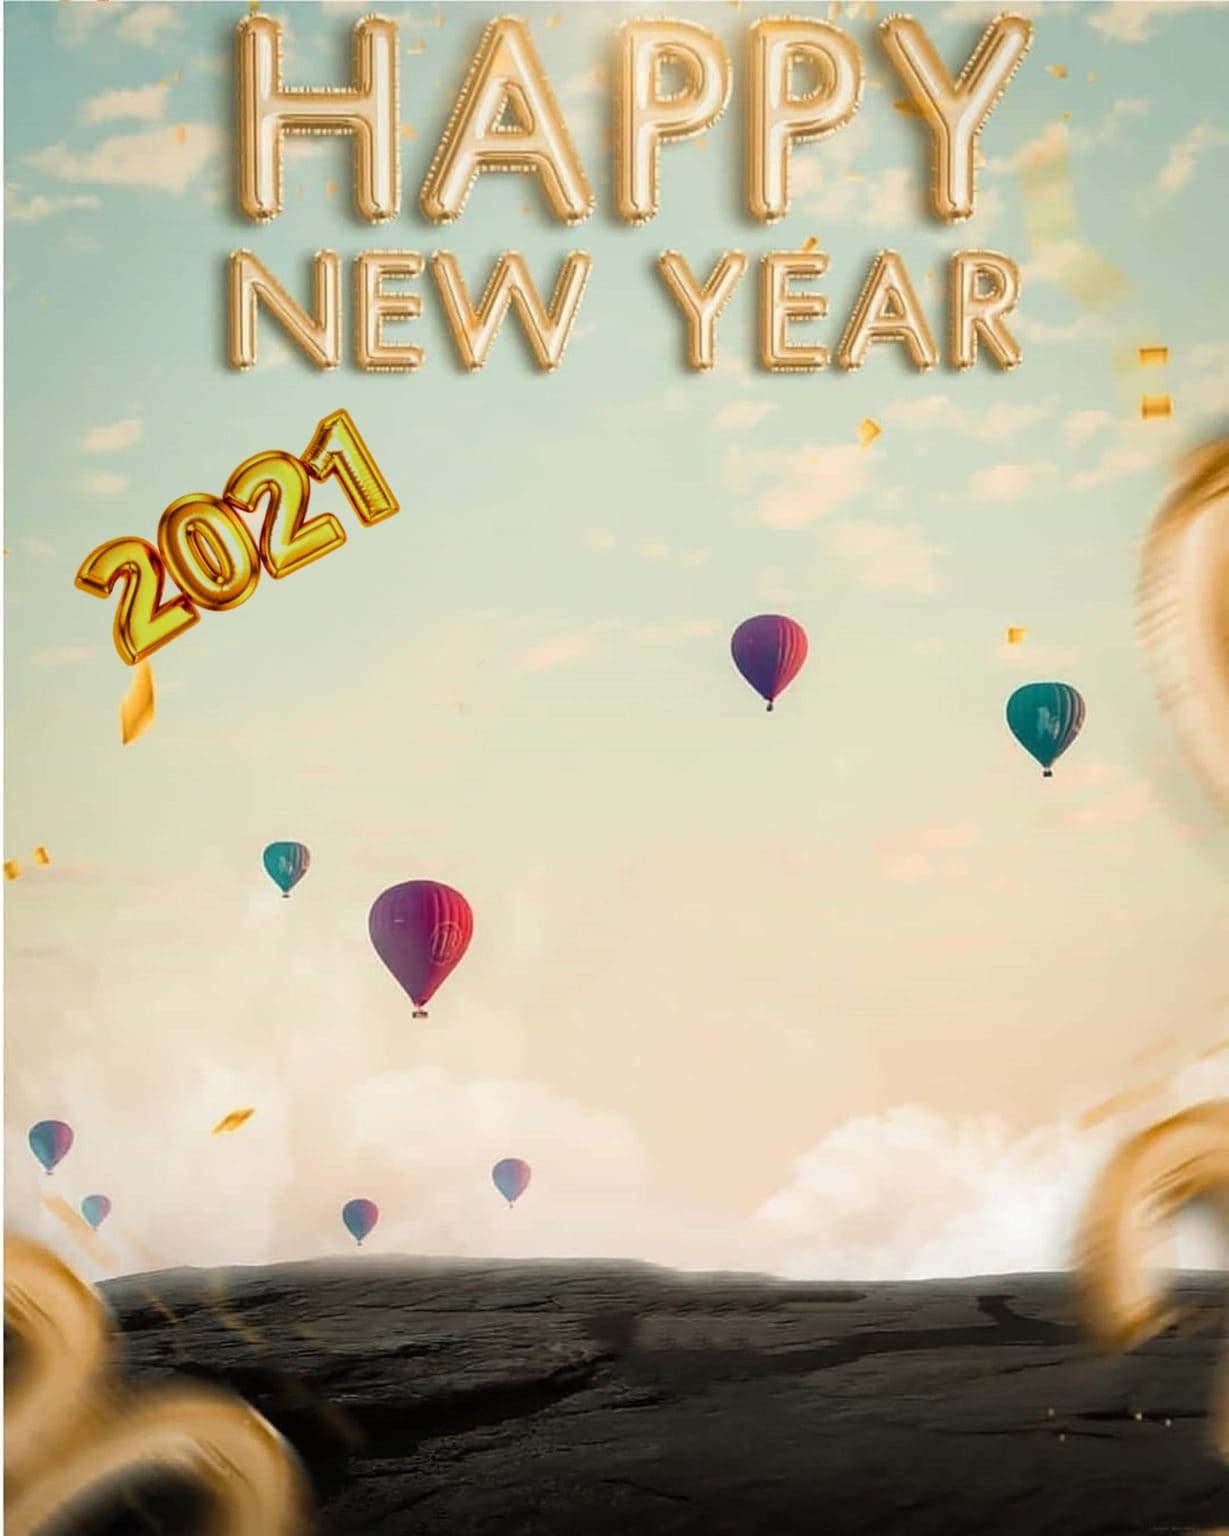 Happy new year 2021 background, 2021 background for editing - LEARNINGWITHSR